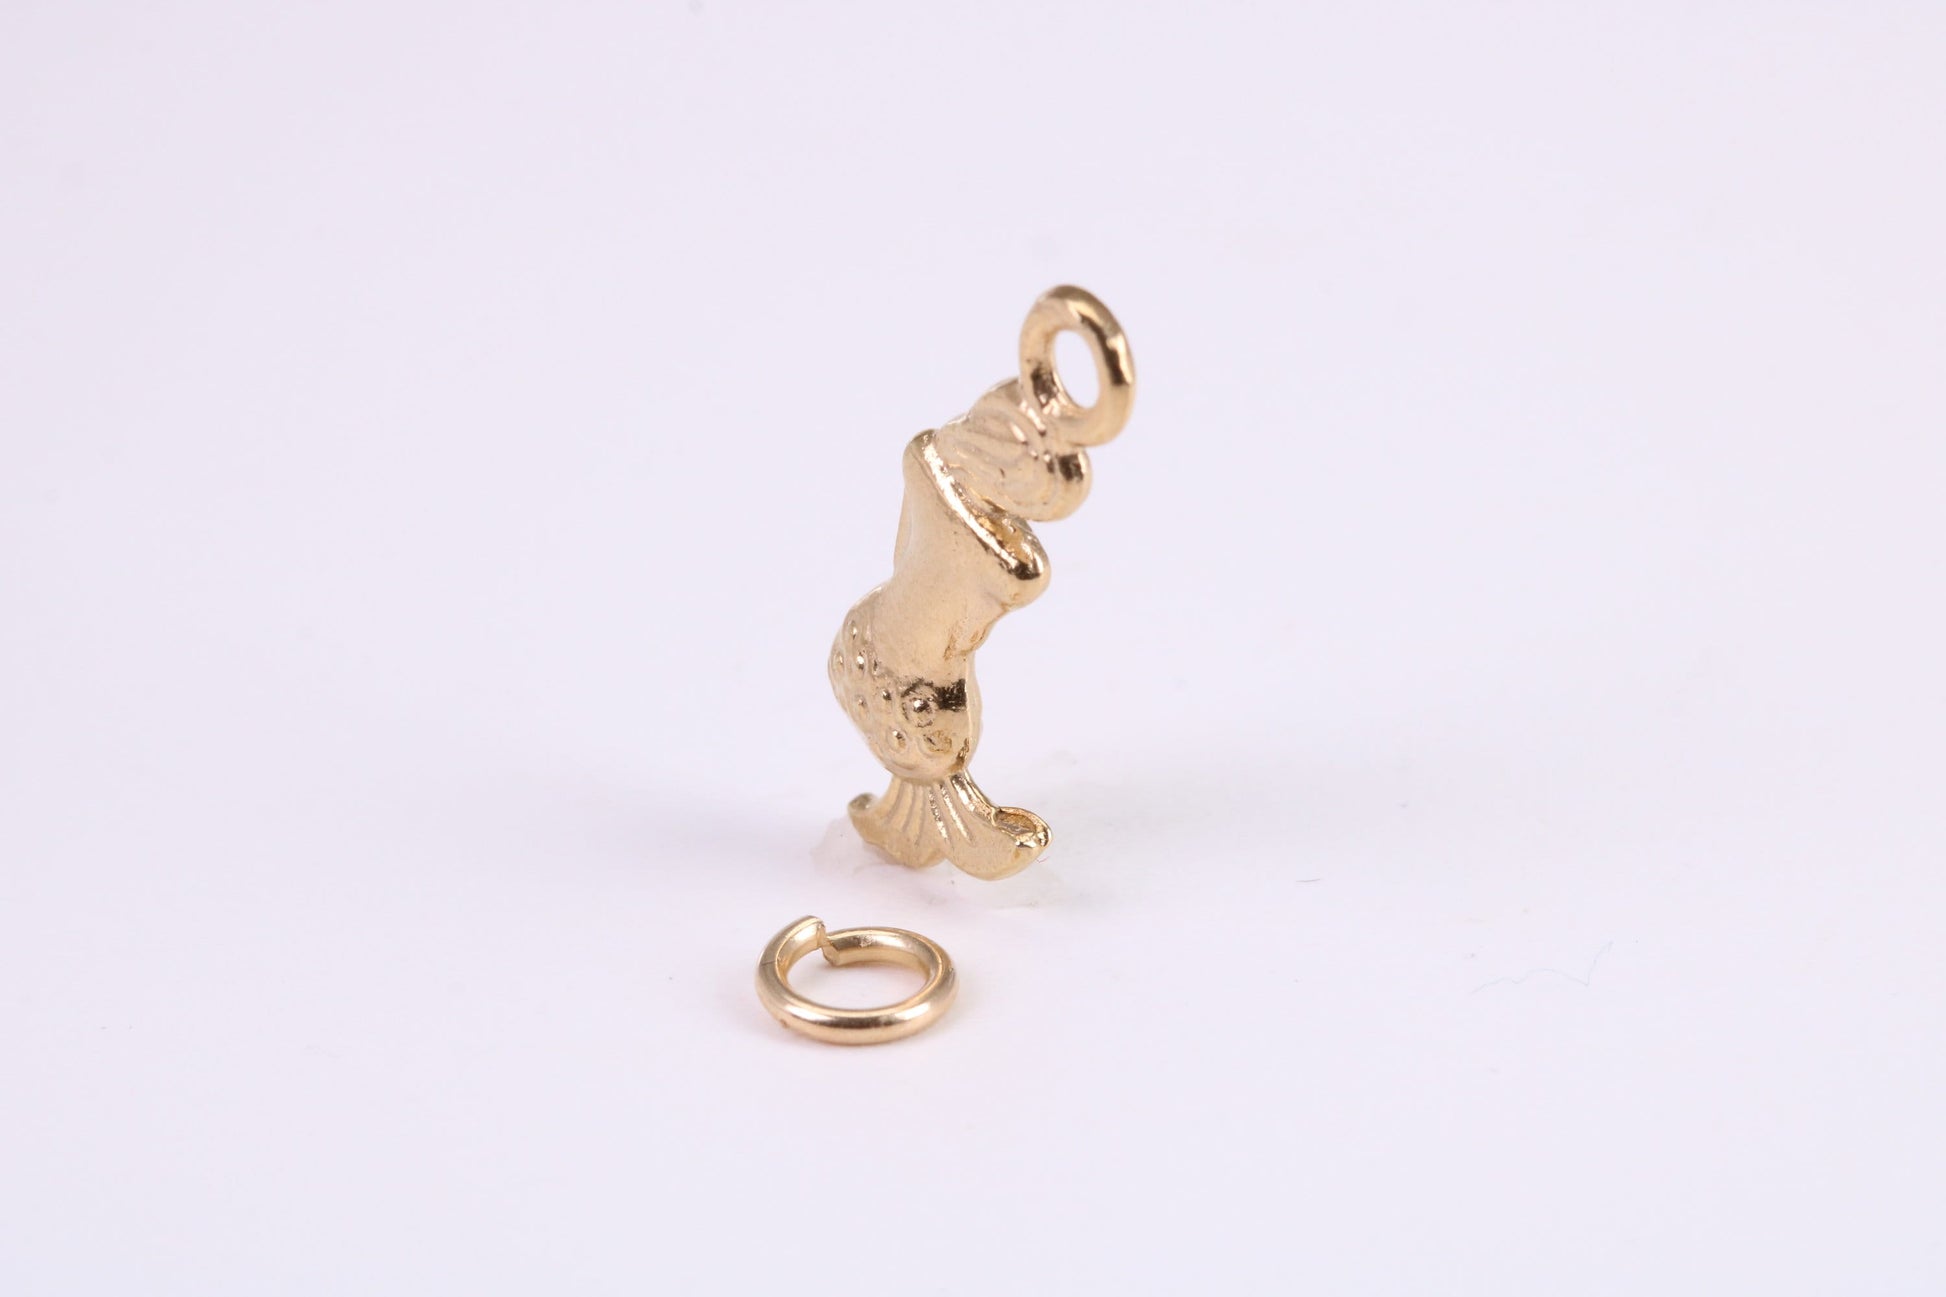 Mermaid Charm, Traditional Charm, Made from Solid Yellow Gold, British Hallmarked, Complete with Attachment Link